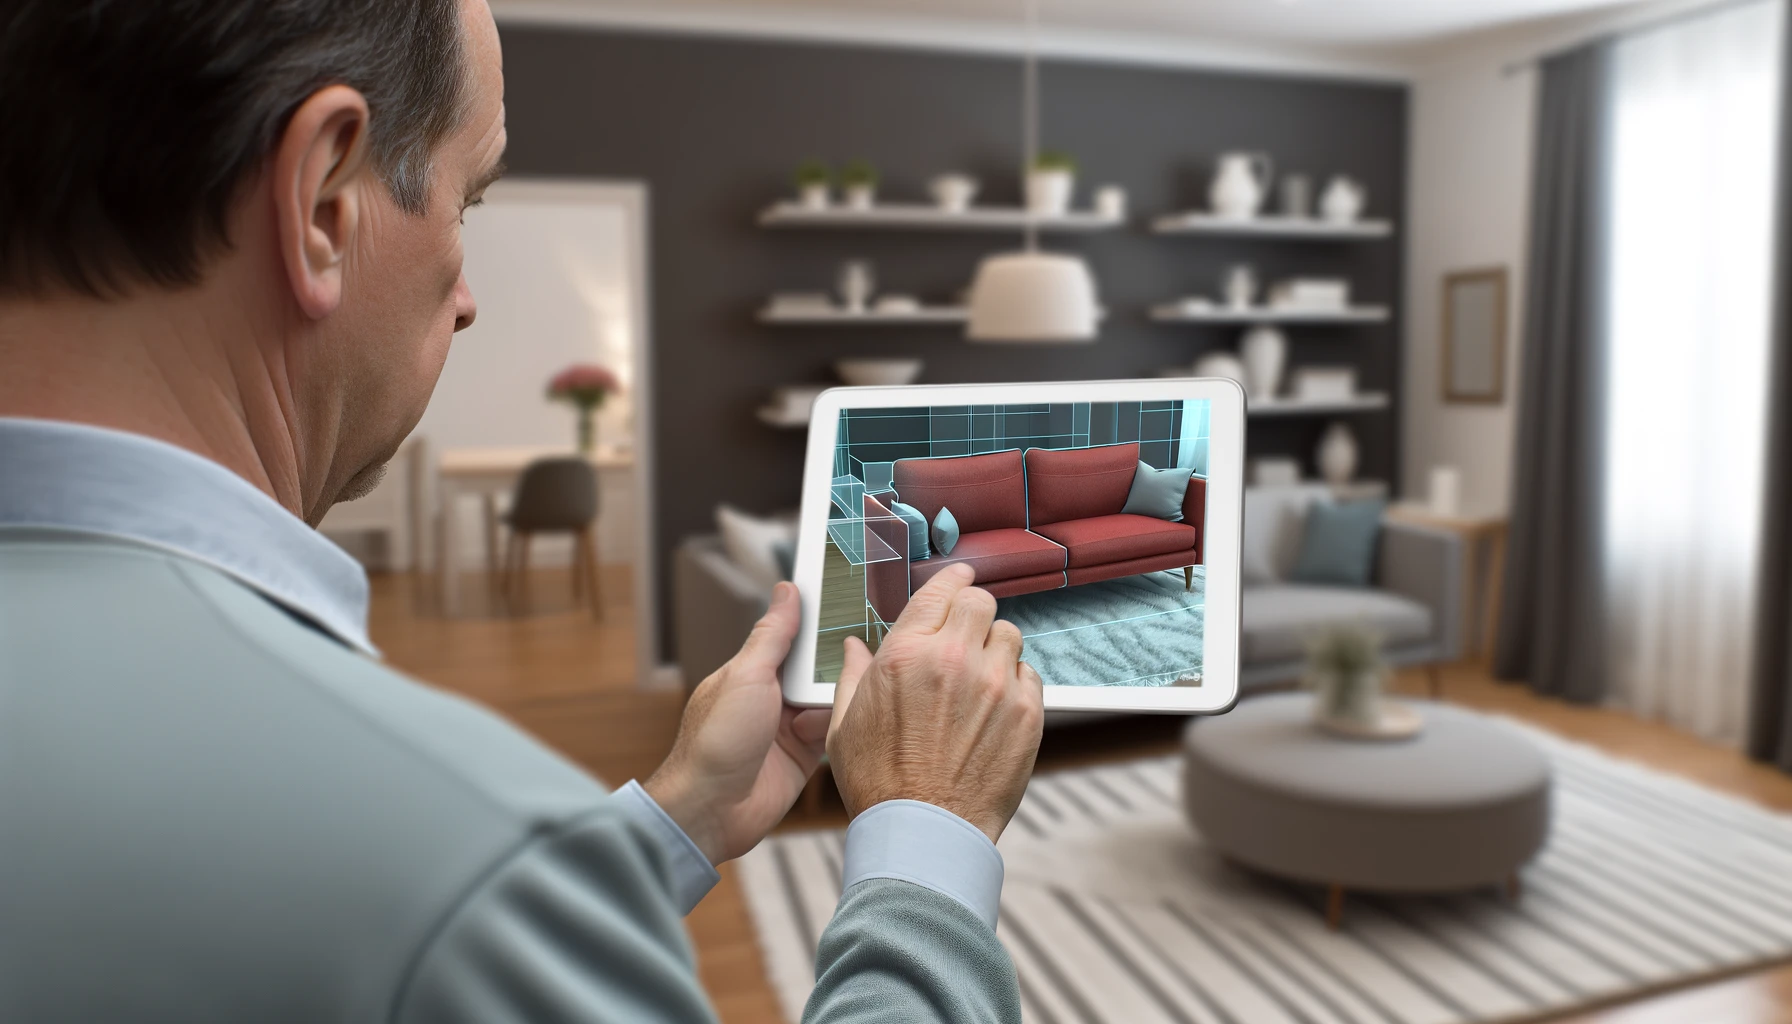 A shopper using a mobile device to place virtual furniture in his living room and see how it looks. The image shows a middle-aged man holding a tablet that displays a 3D model of a sofa in augmented reality, as if he were actually in the room.